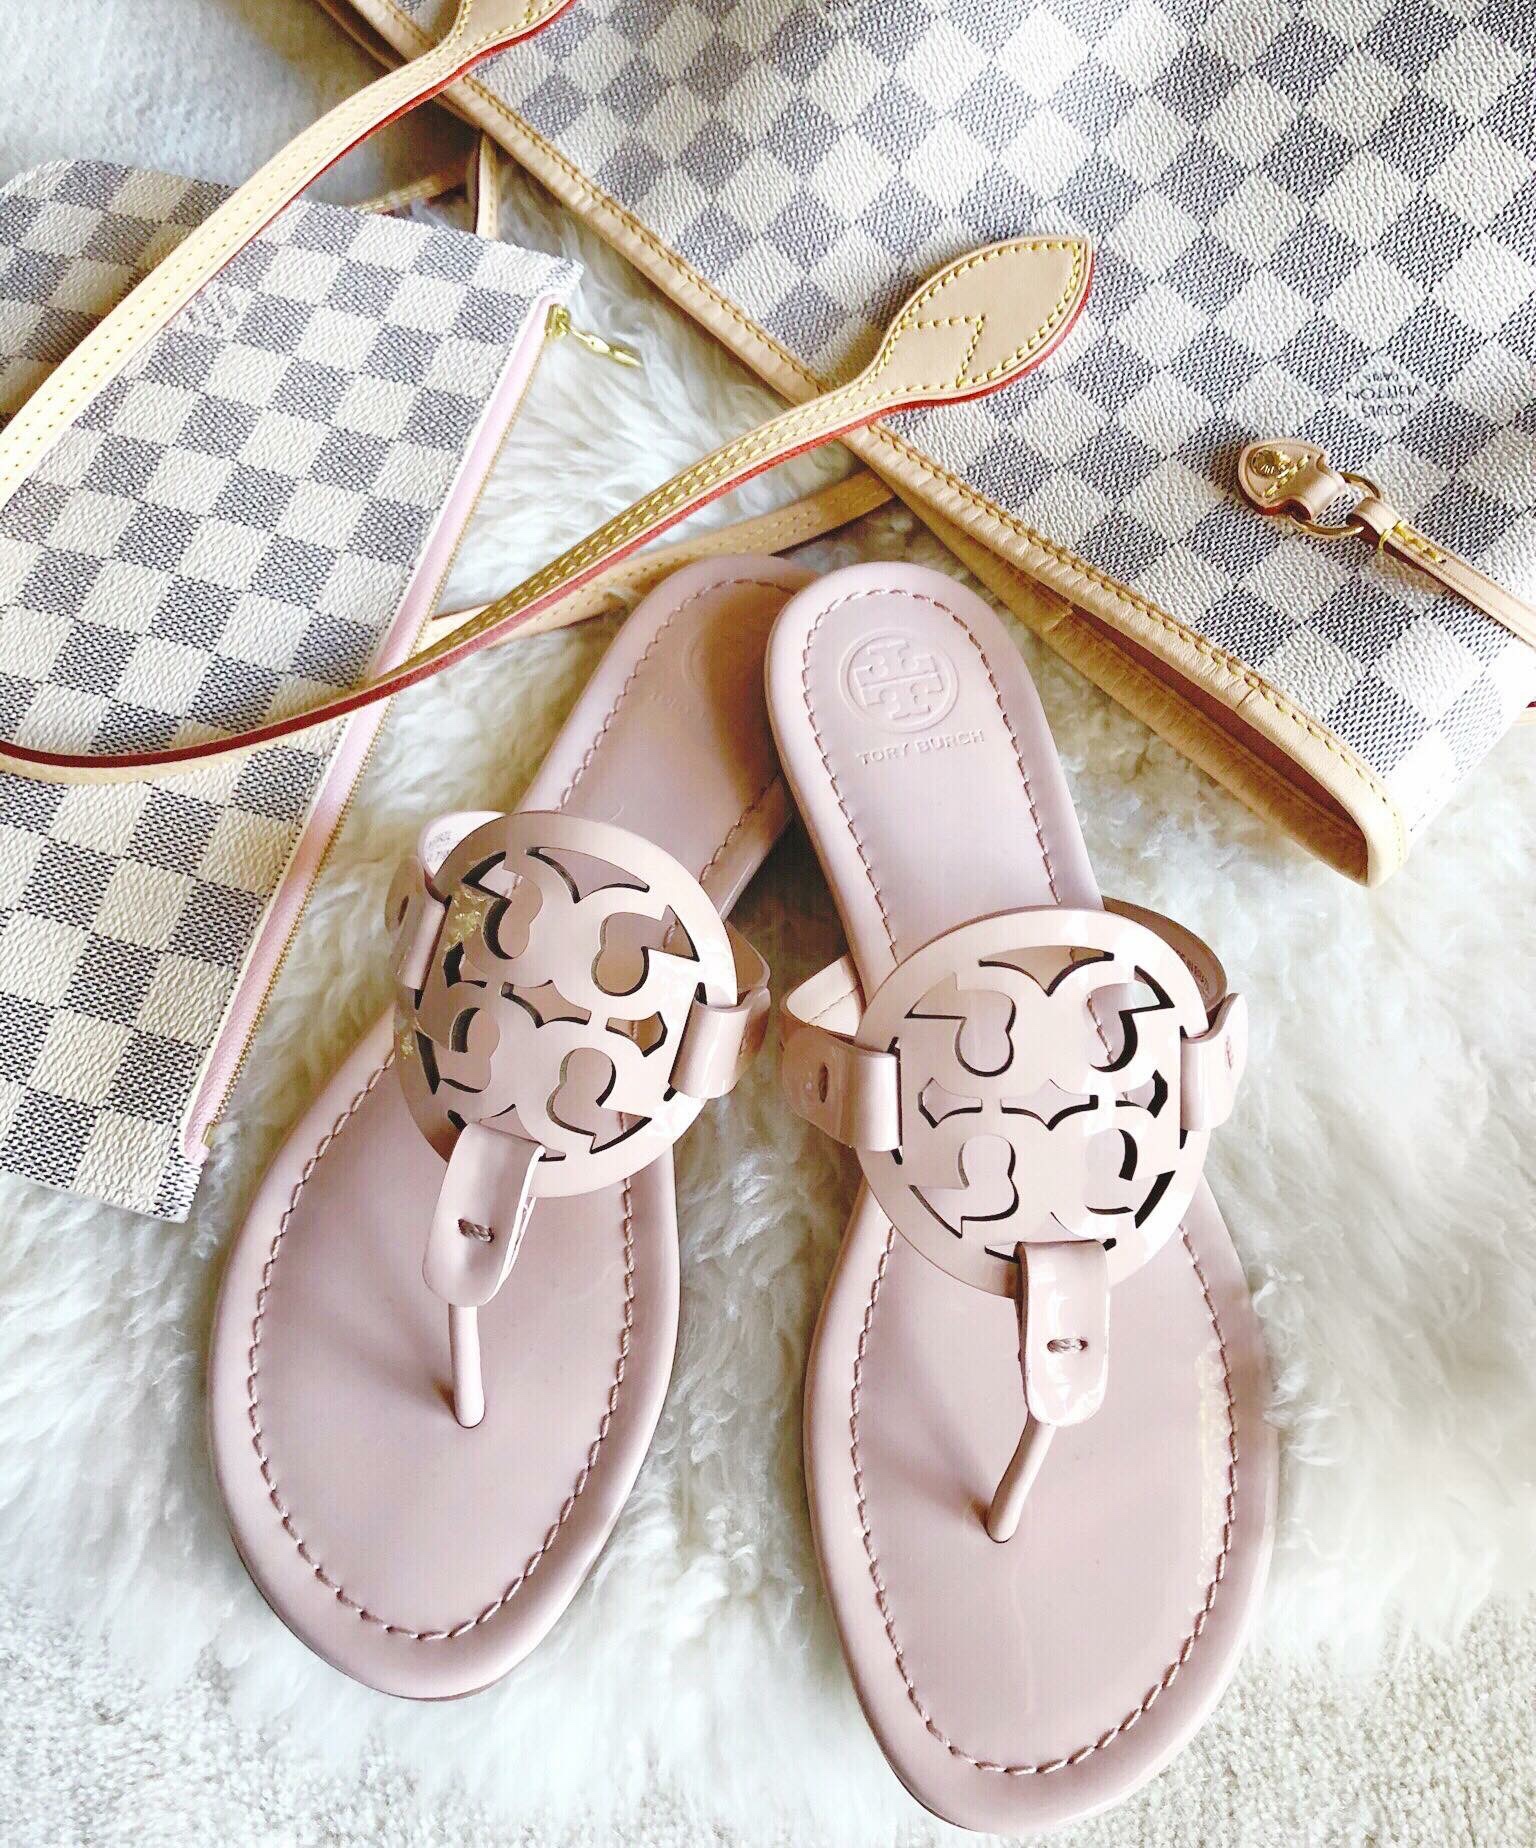 Our Favorite Tory Burch Sandal Colors & Styles + Giftcard Promo! - The ...